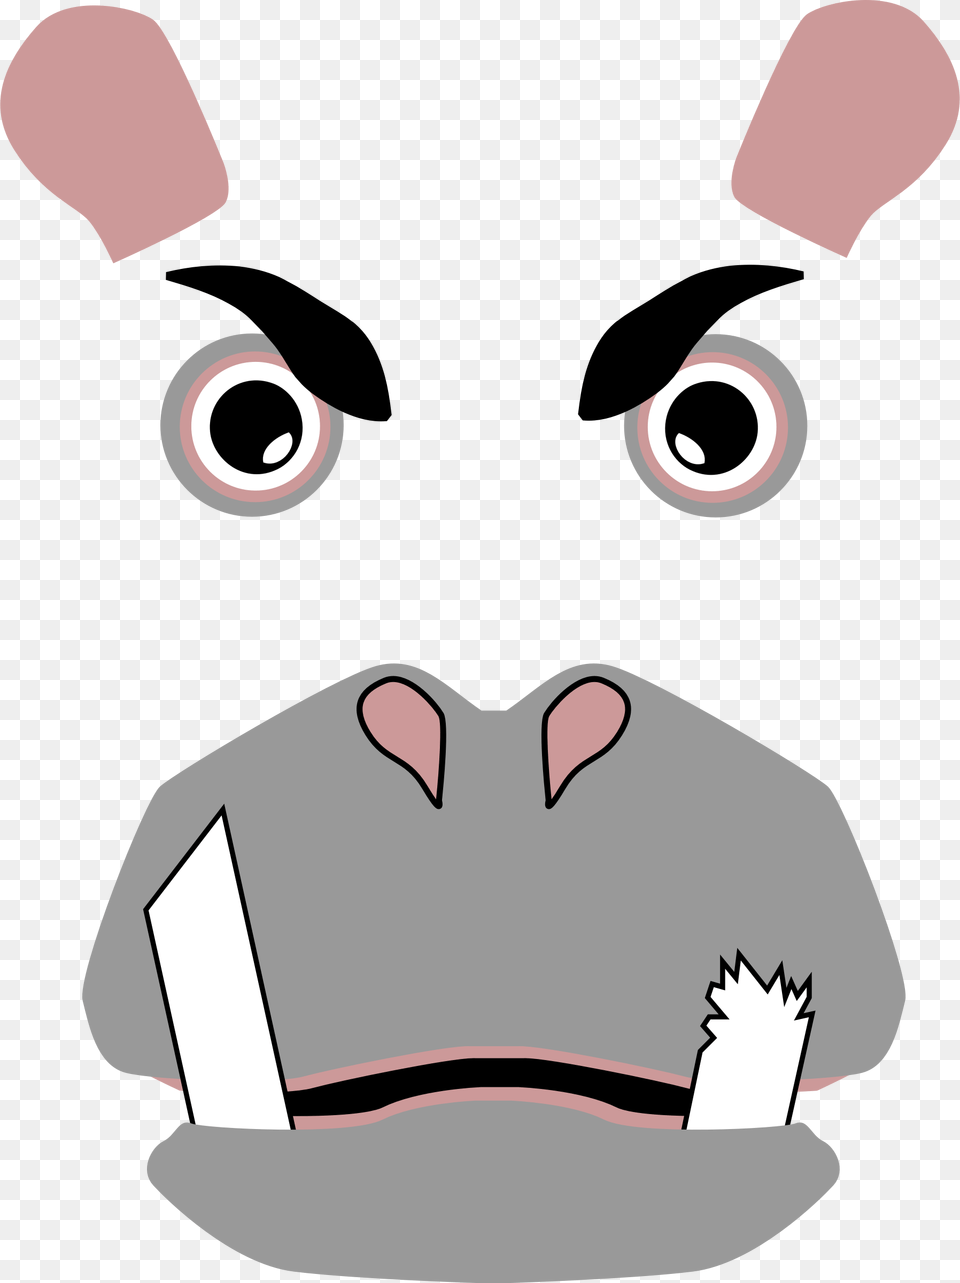 This Free Icons Design Of Angry Hippo, Animal, Mammal Png Image